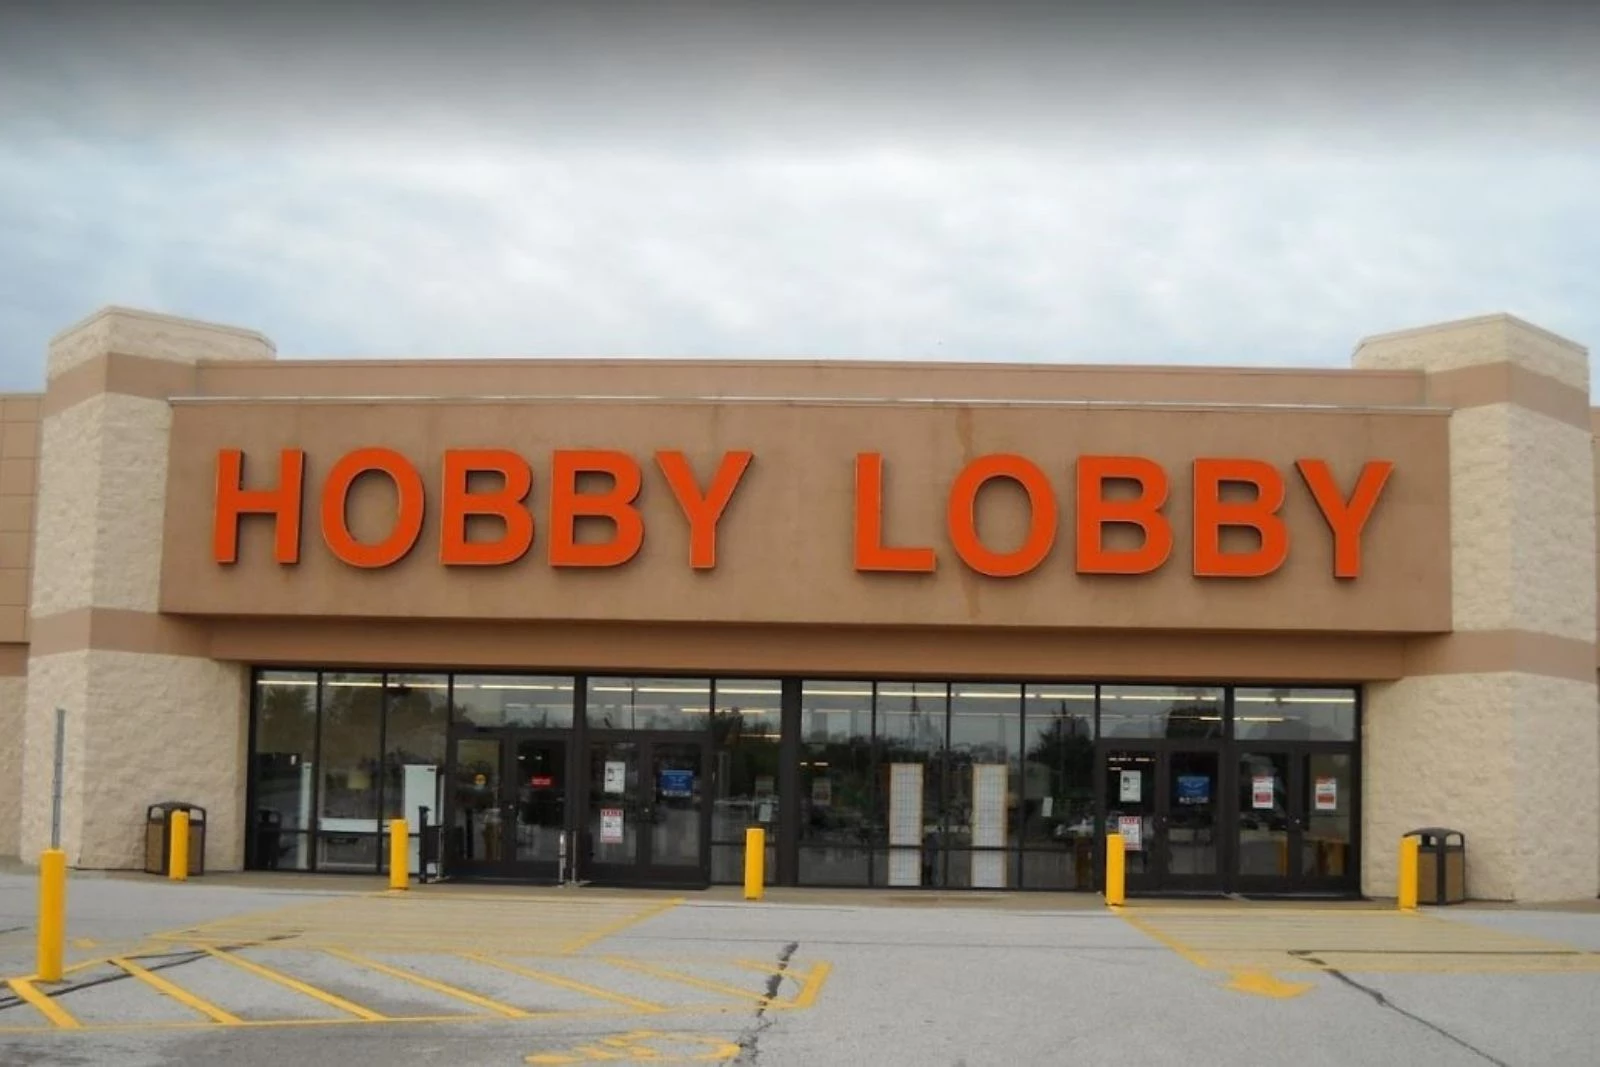 is the hobby lobby app known as a malware site